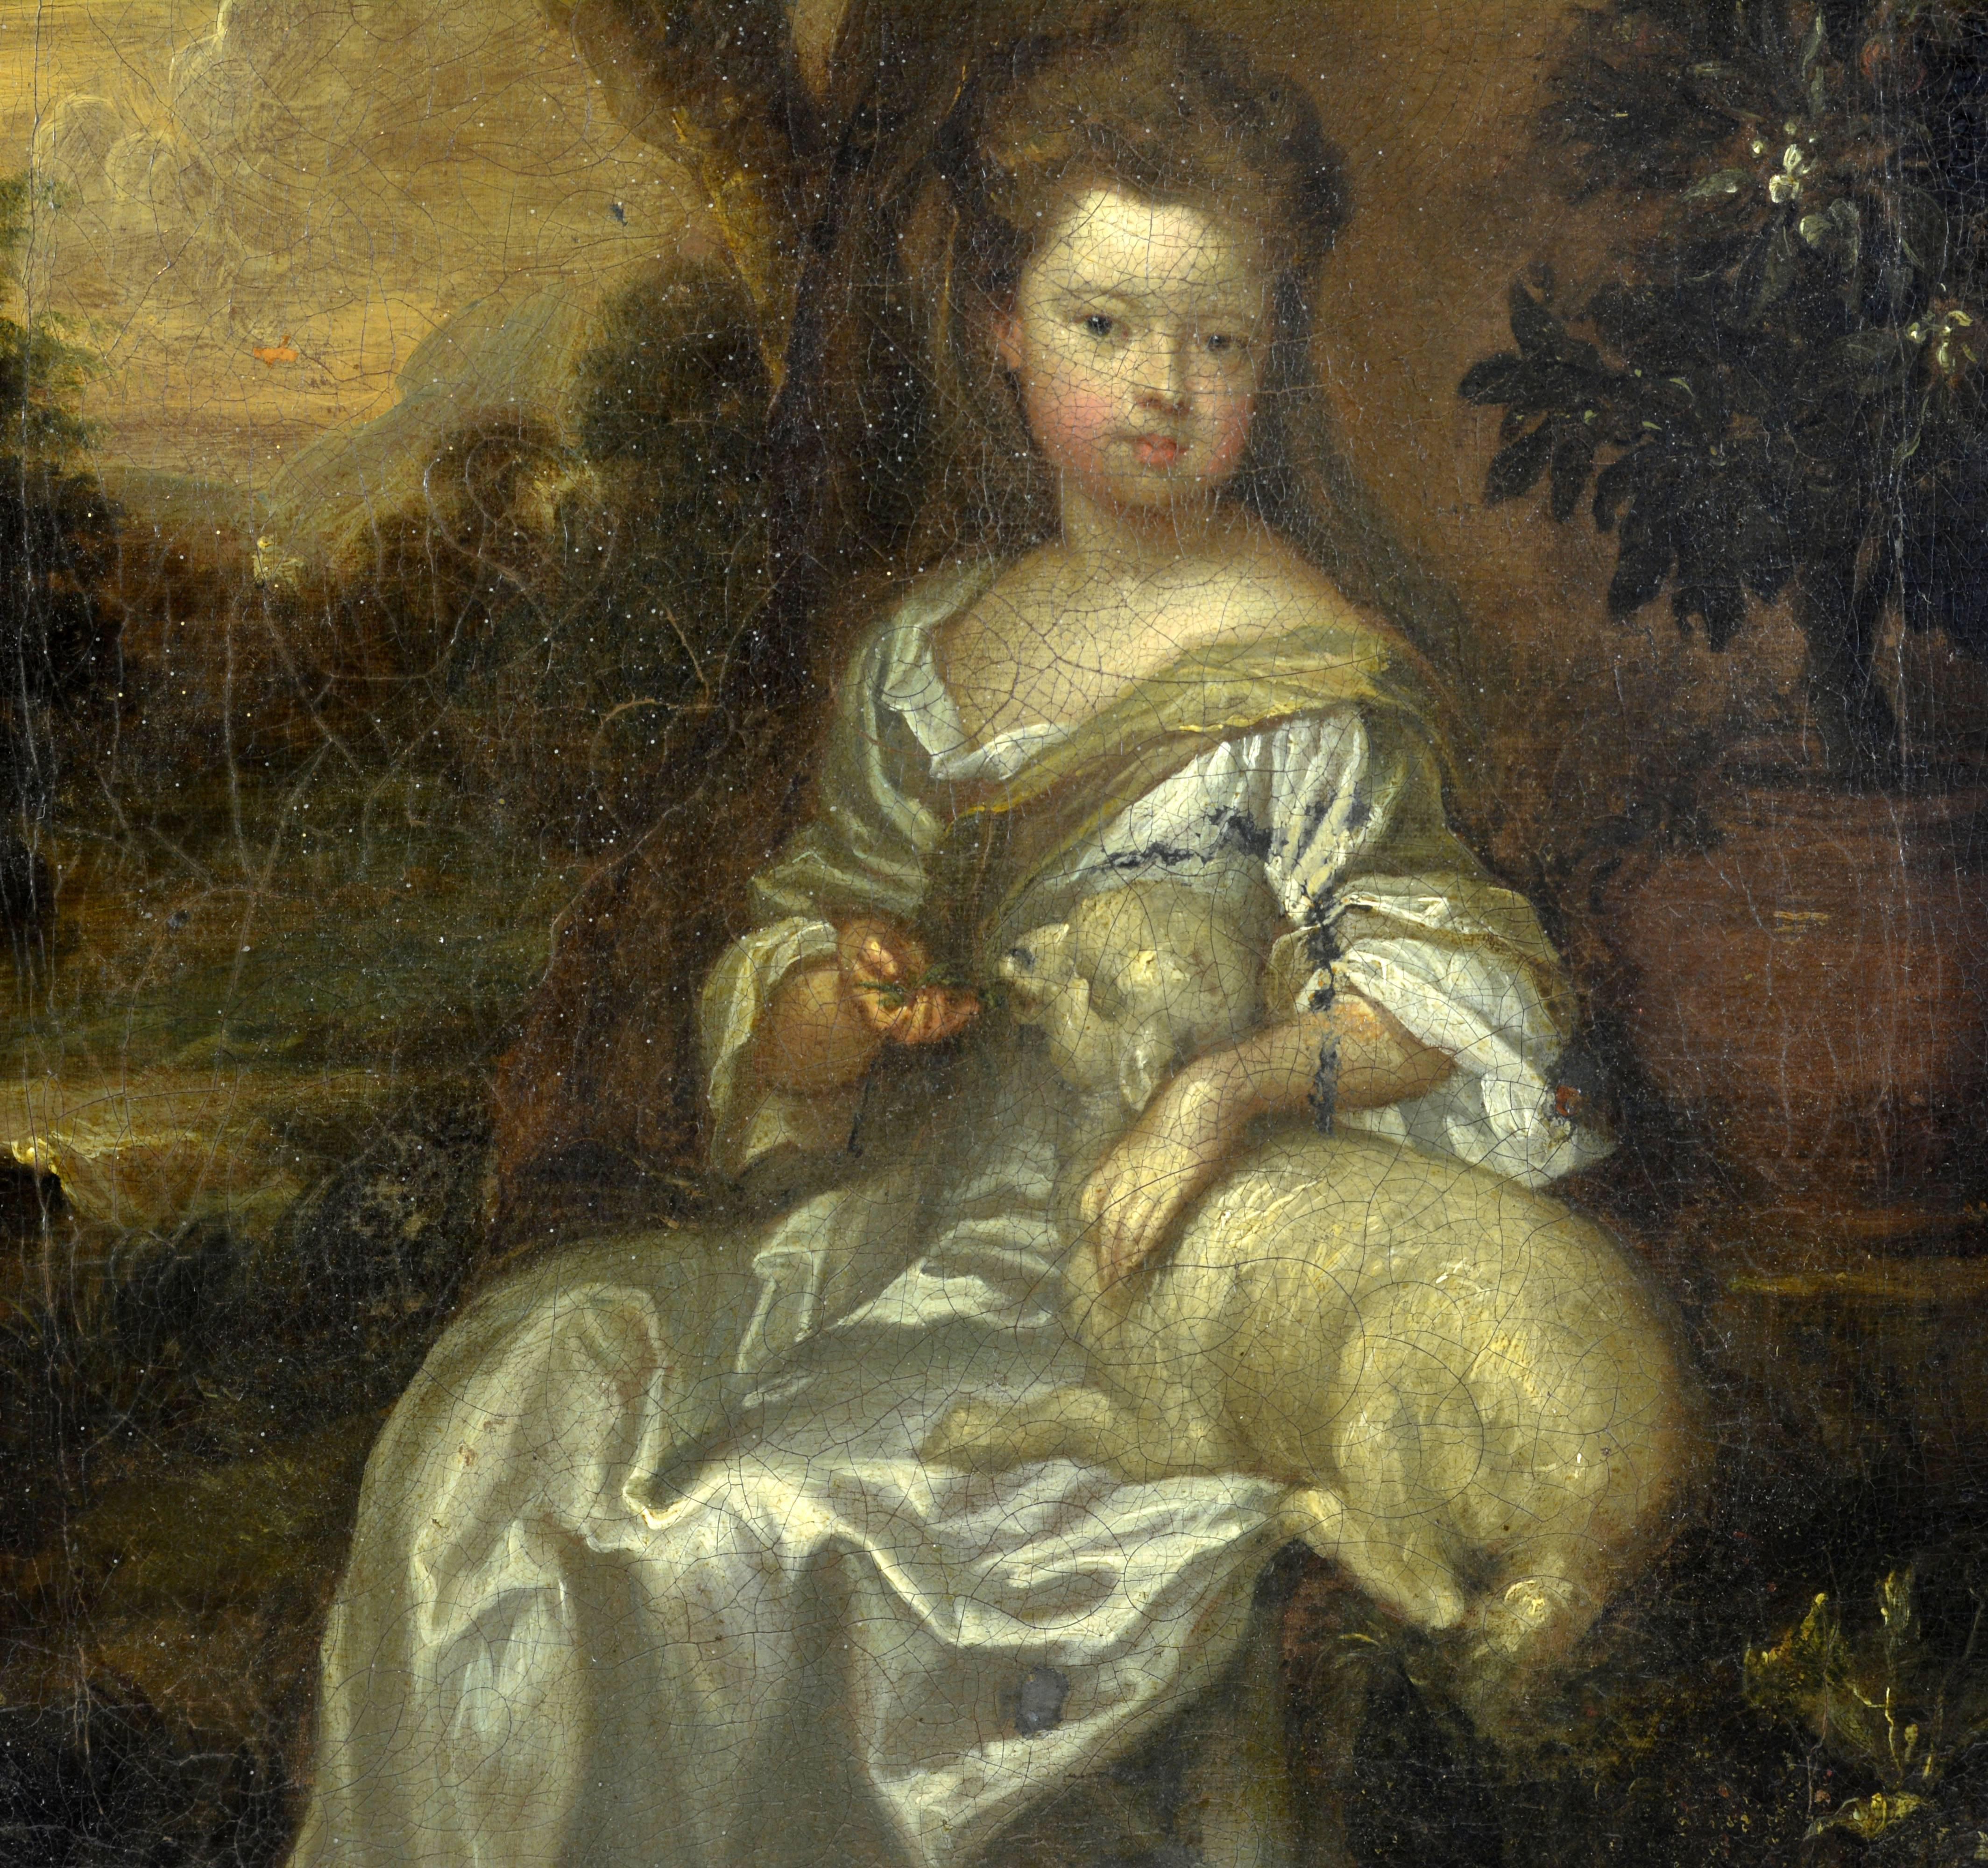 Rococo 'Young Girl with a Lamb' School of Sir Godfrey Kneller, British, 1646-1723